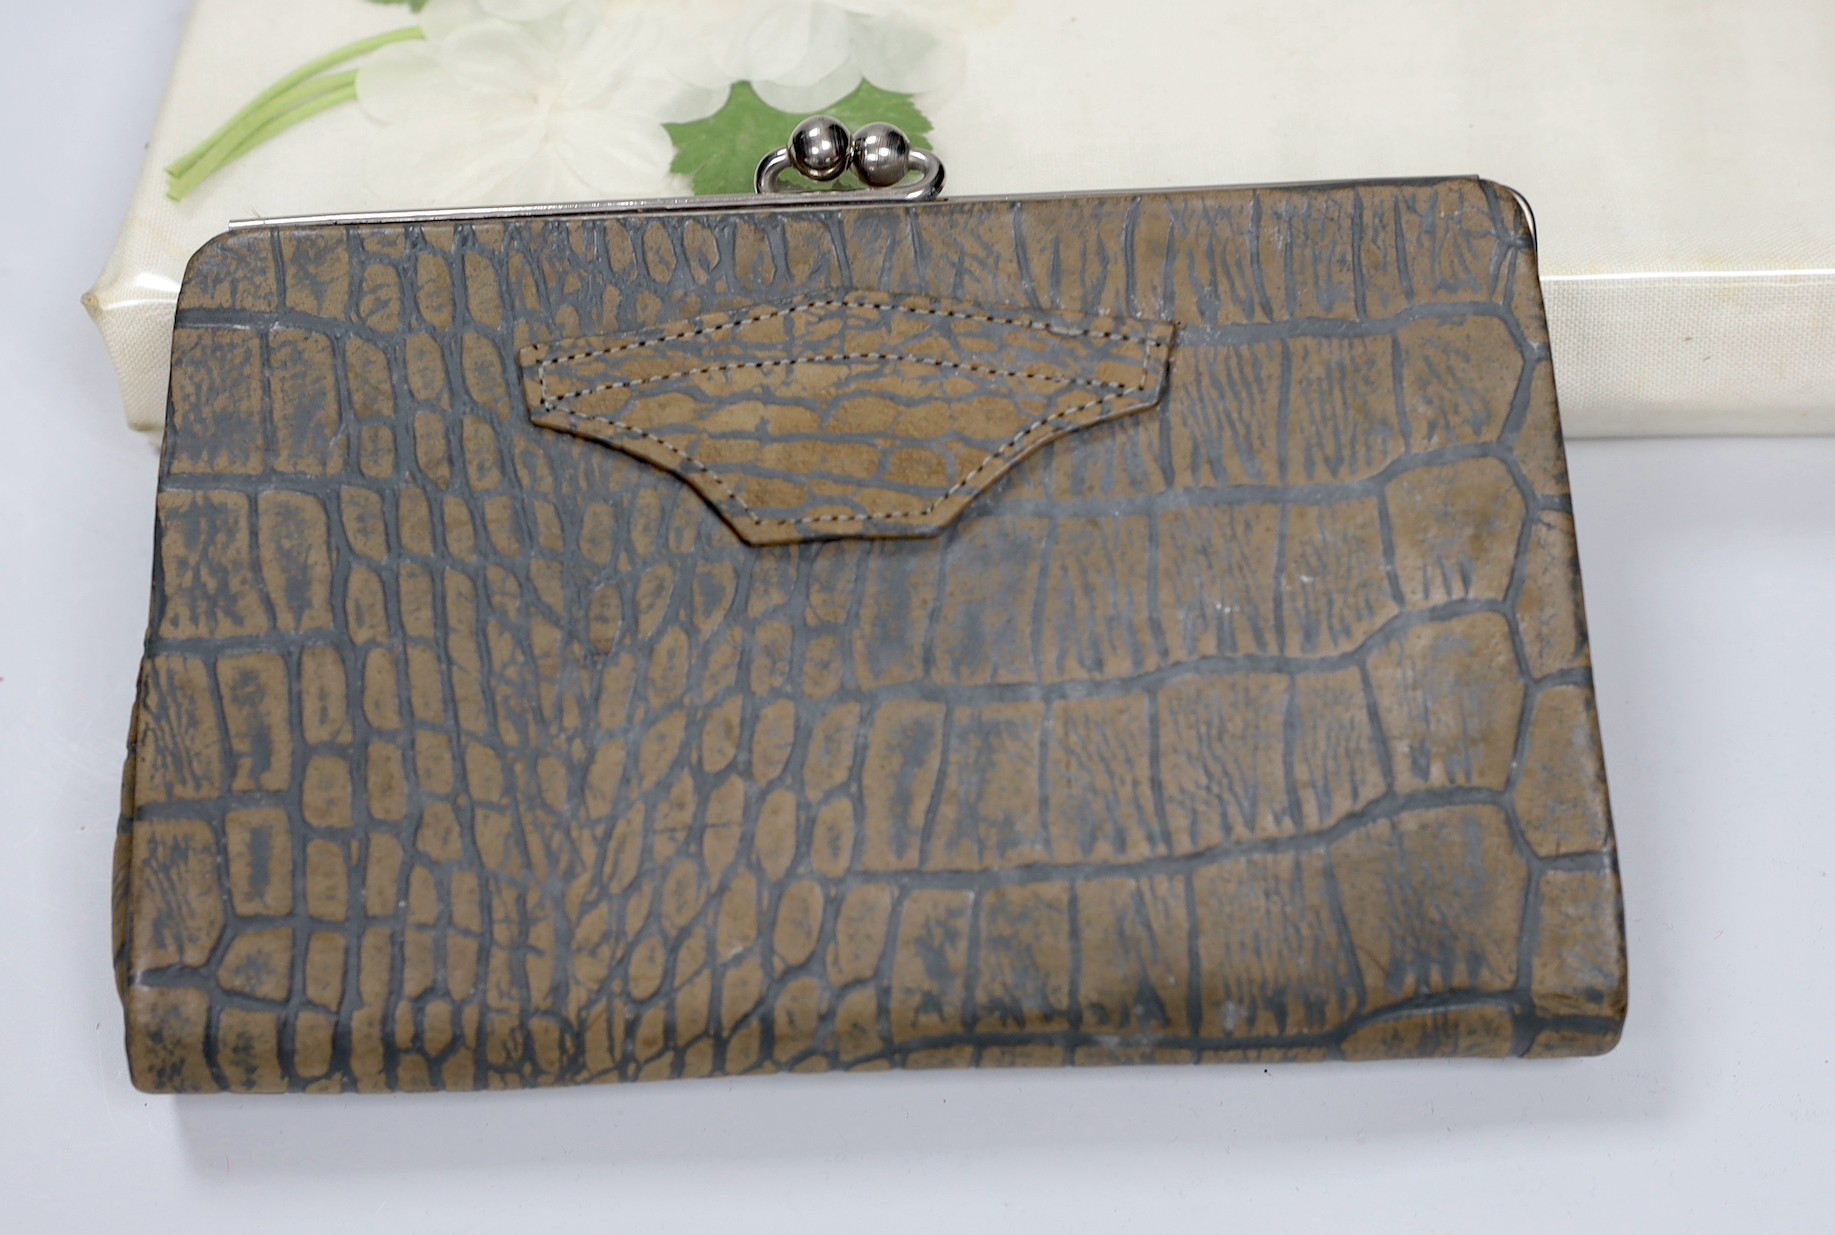 Two 1960's gilt metal ladies evening bags, a metal and wooden bag, a 1950's plastic and fabric bag - Image 7 of 8